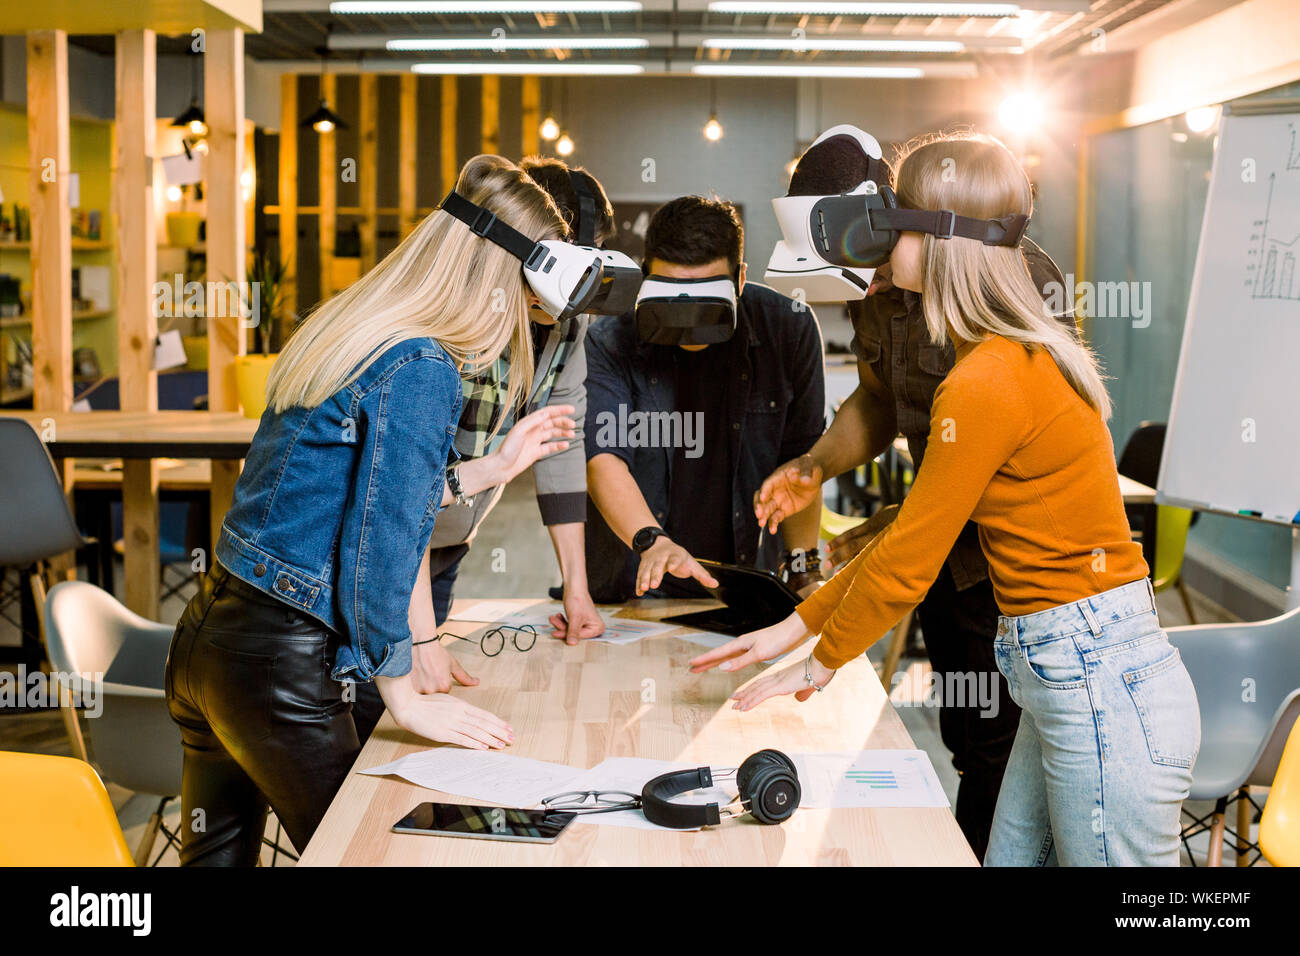 Young people having fun with the new technology vr headset goggles Stock Photo